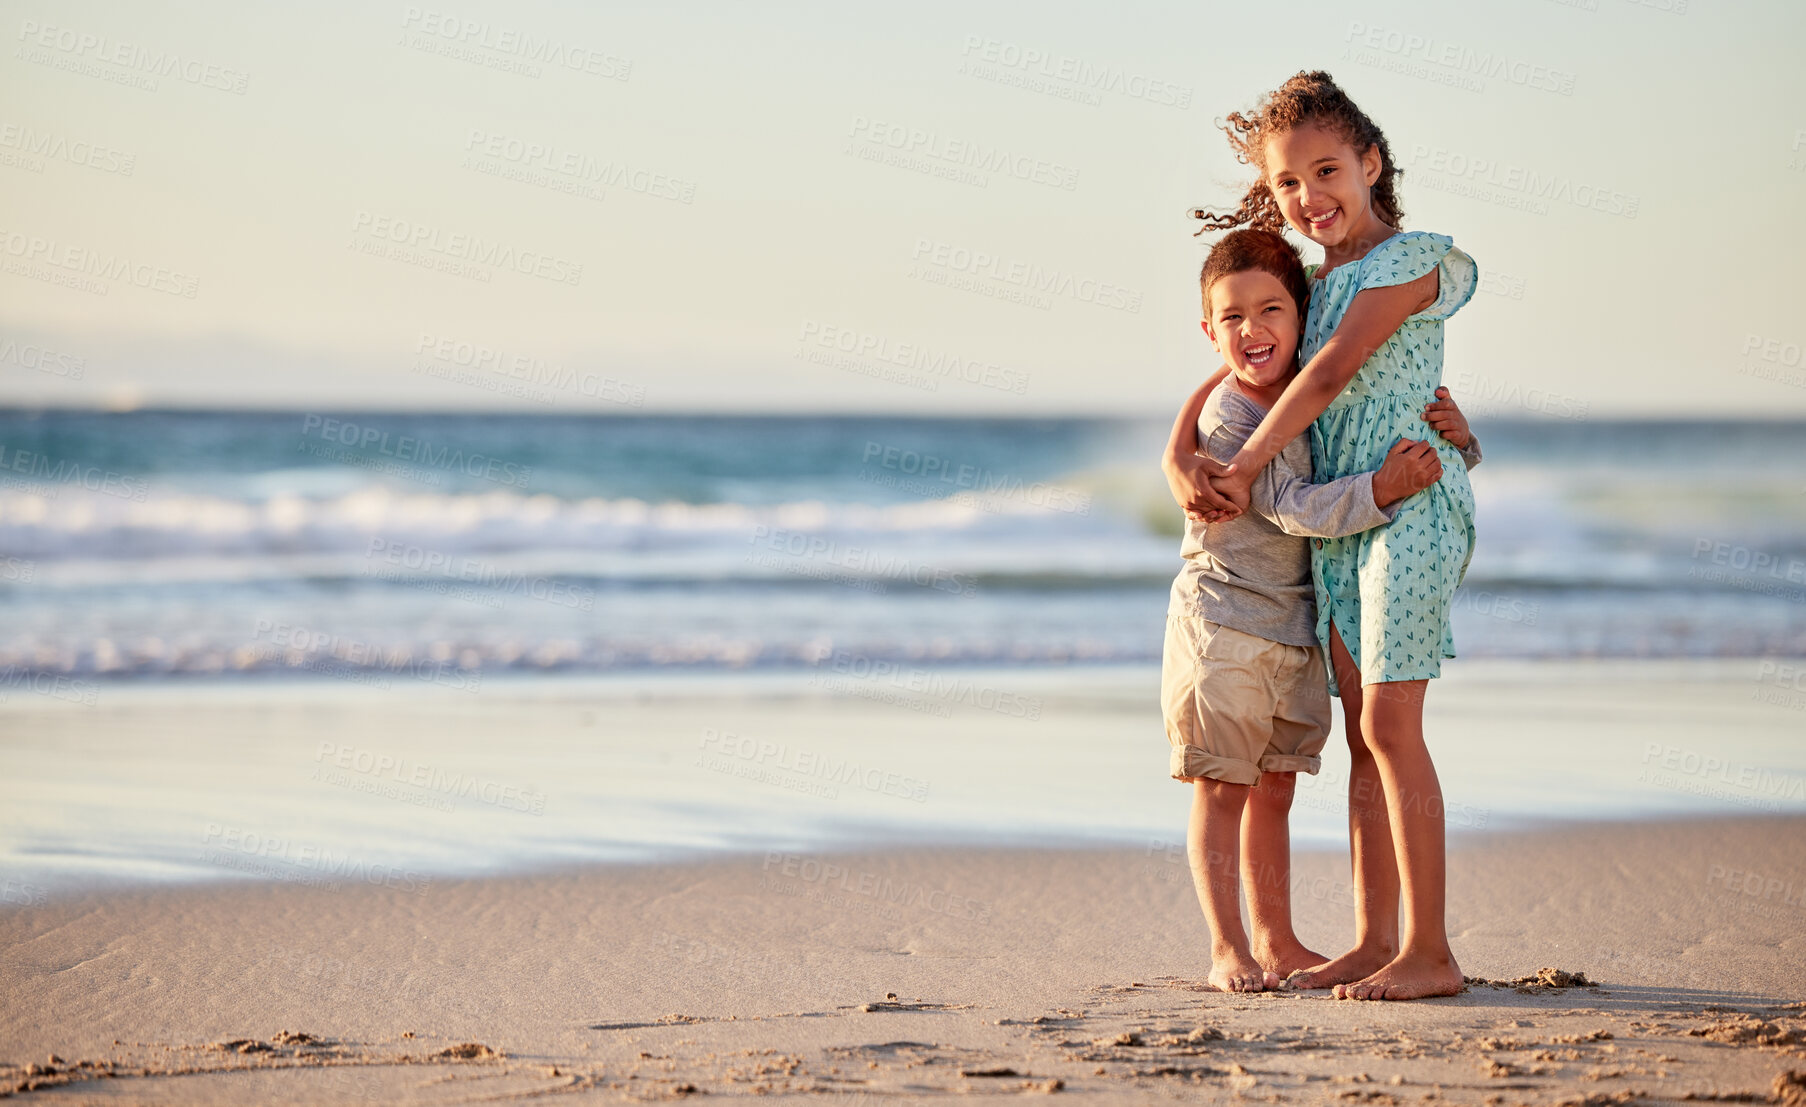 Buy stock photo Shot of an adorable little boy hugging his bigger sister while at the beach